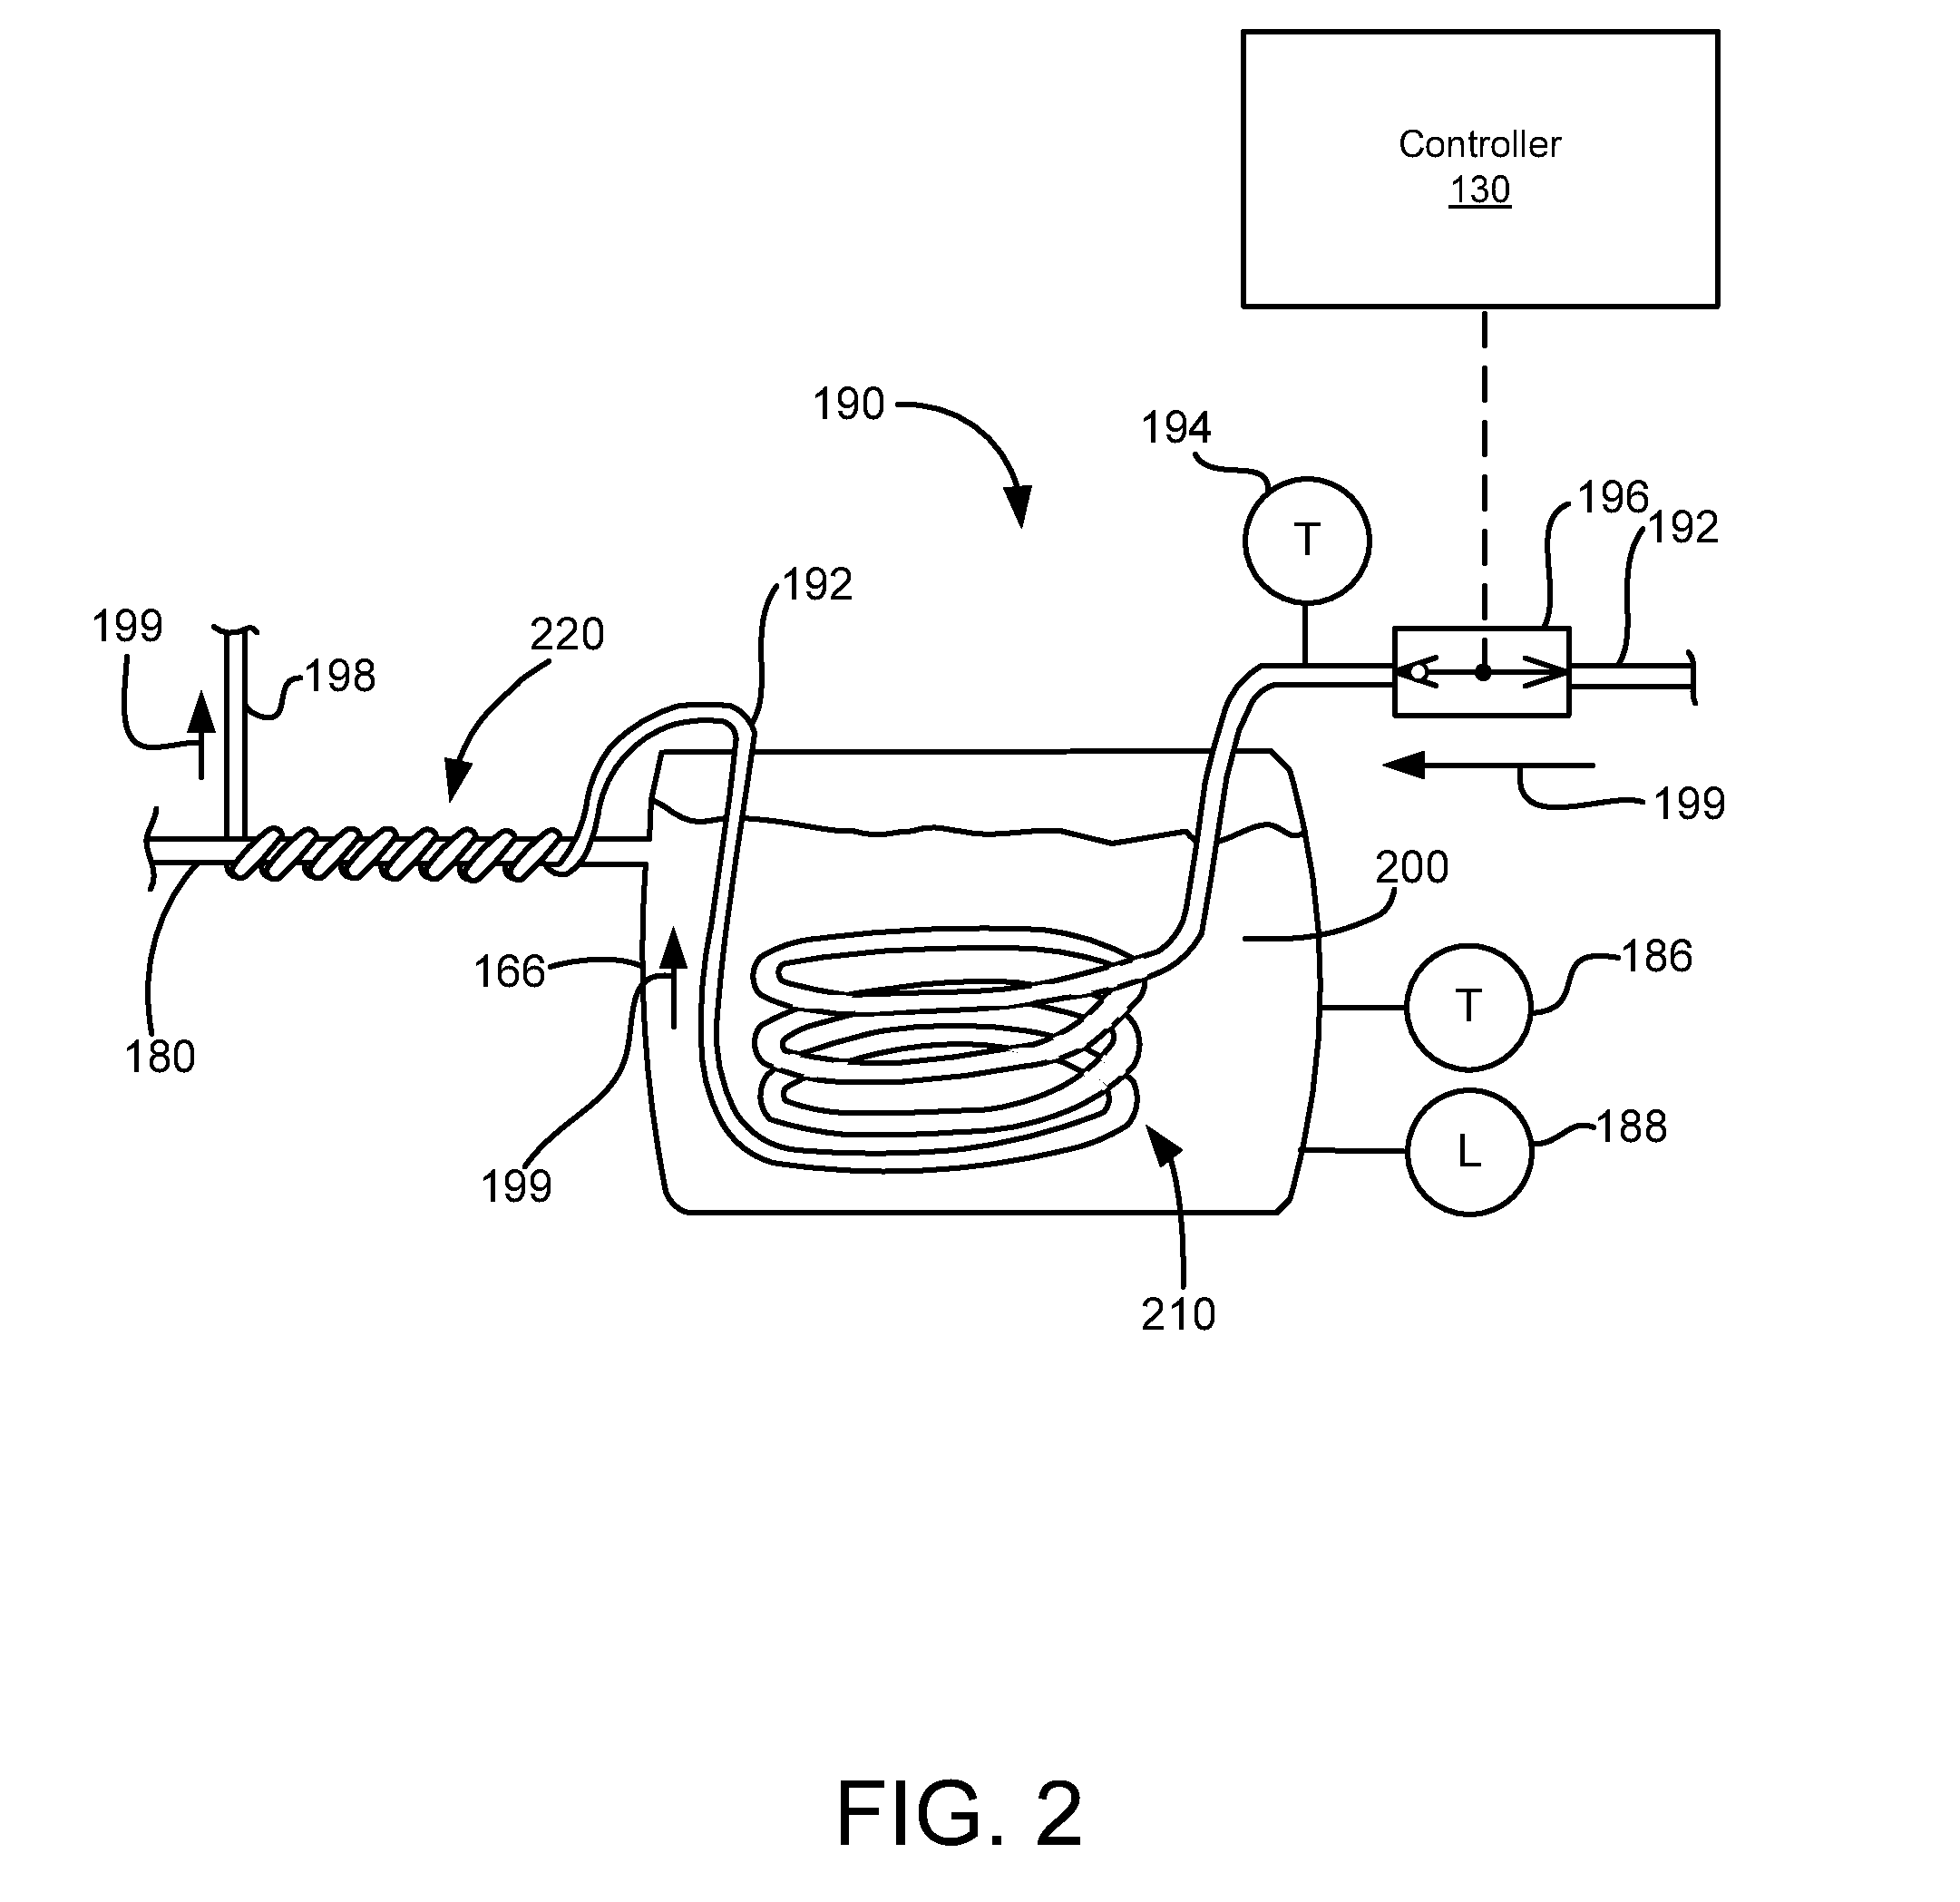 Apparatus, System, and Method for Reductant Line Heating Control